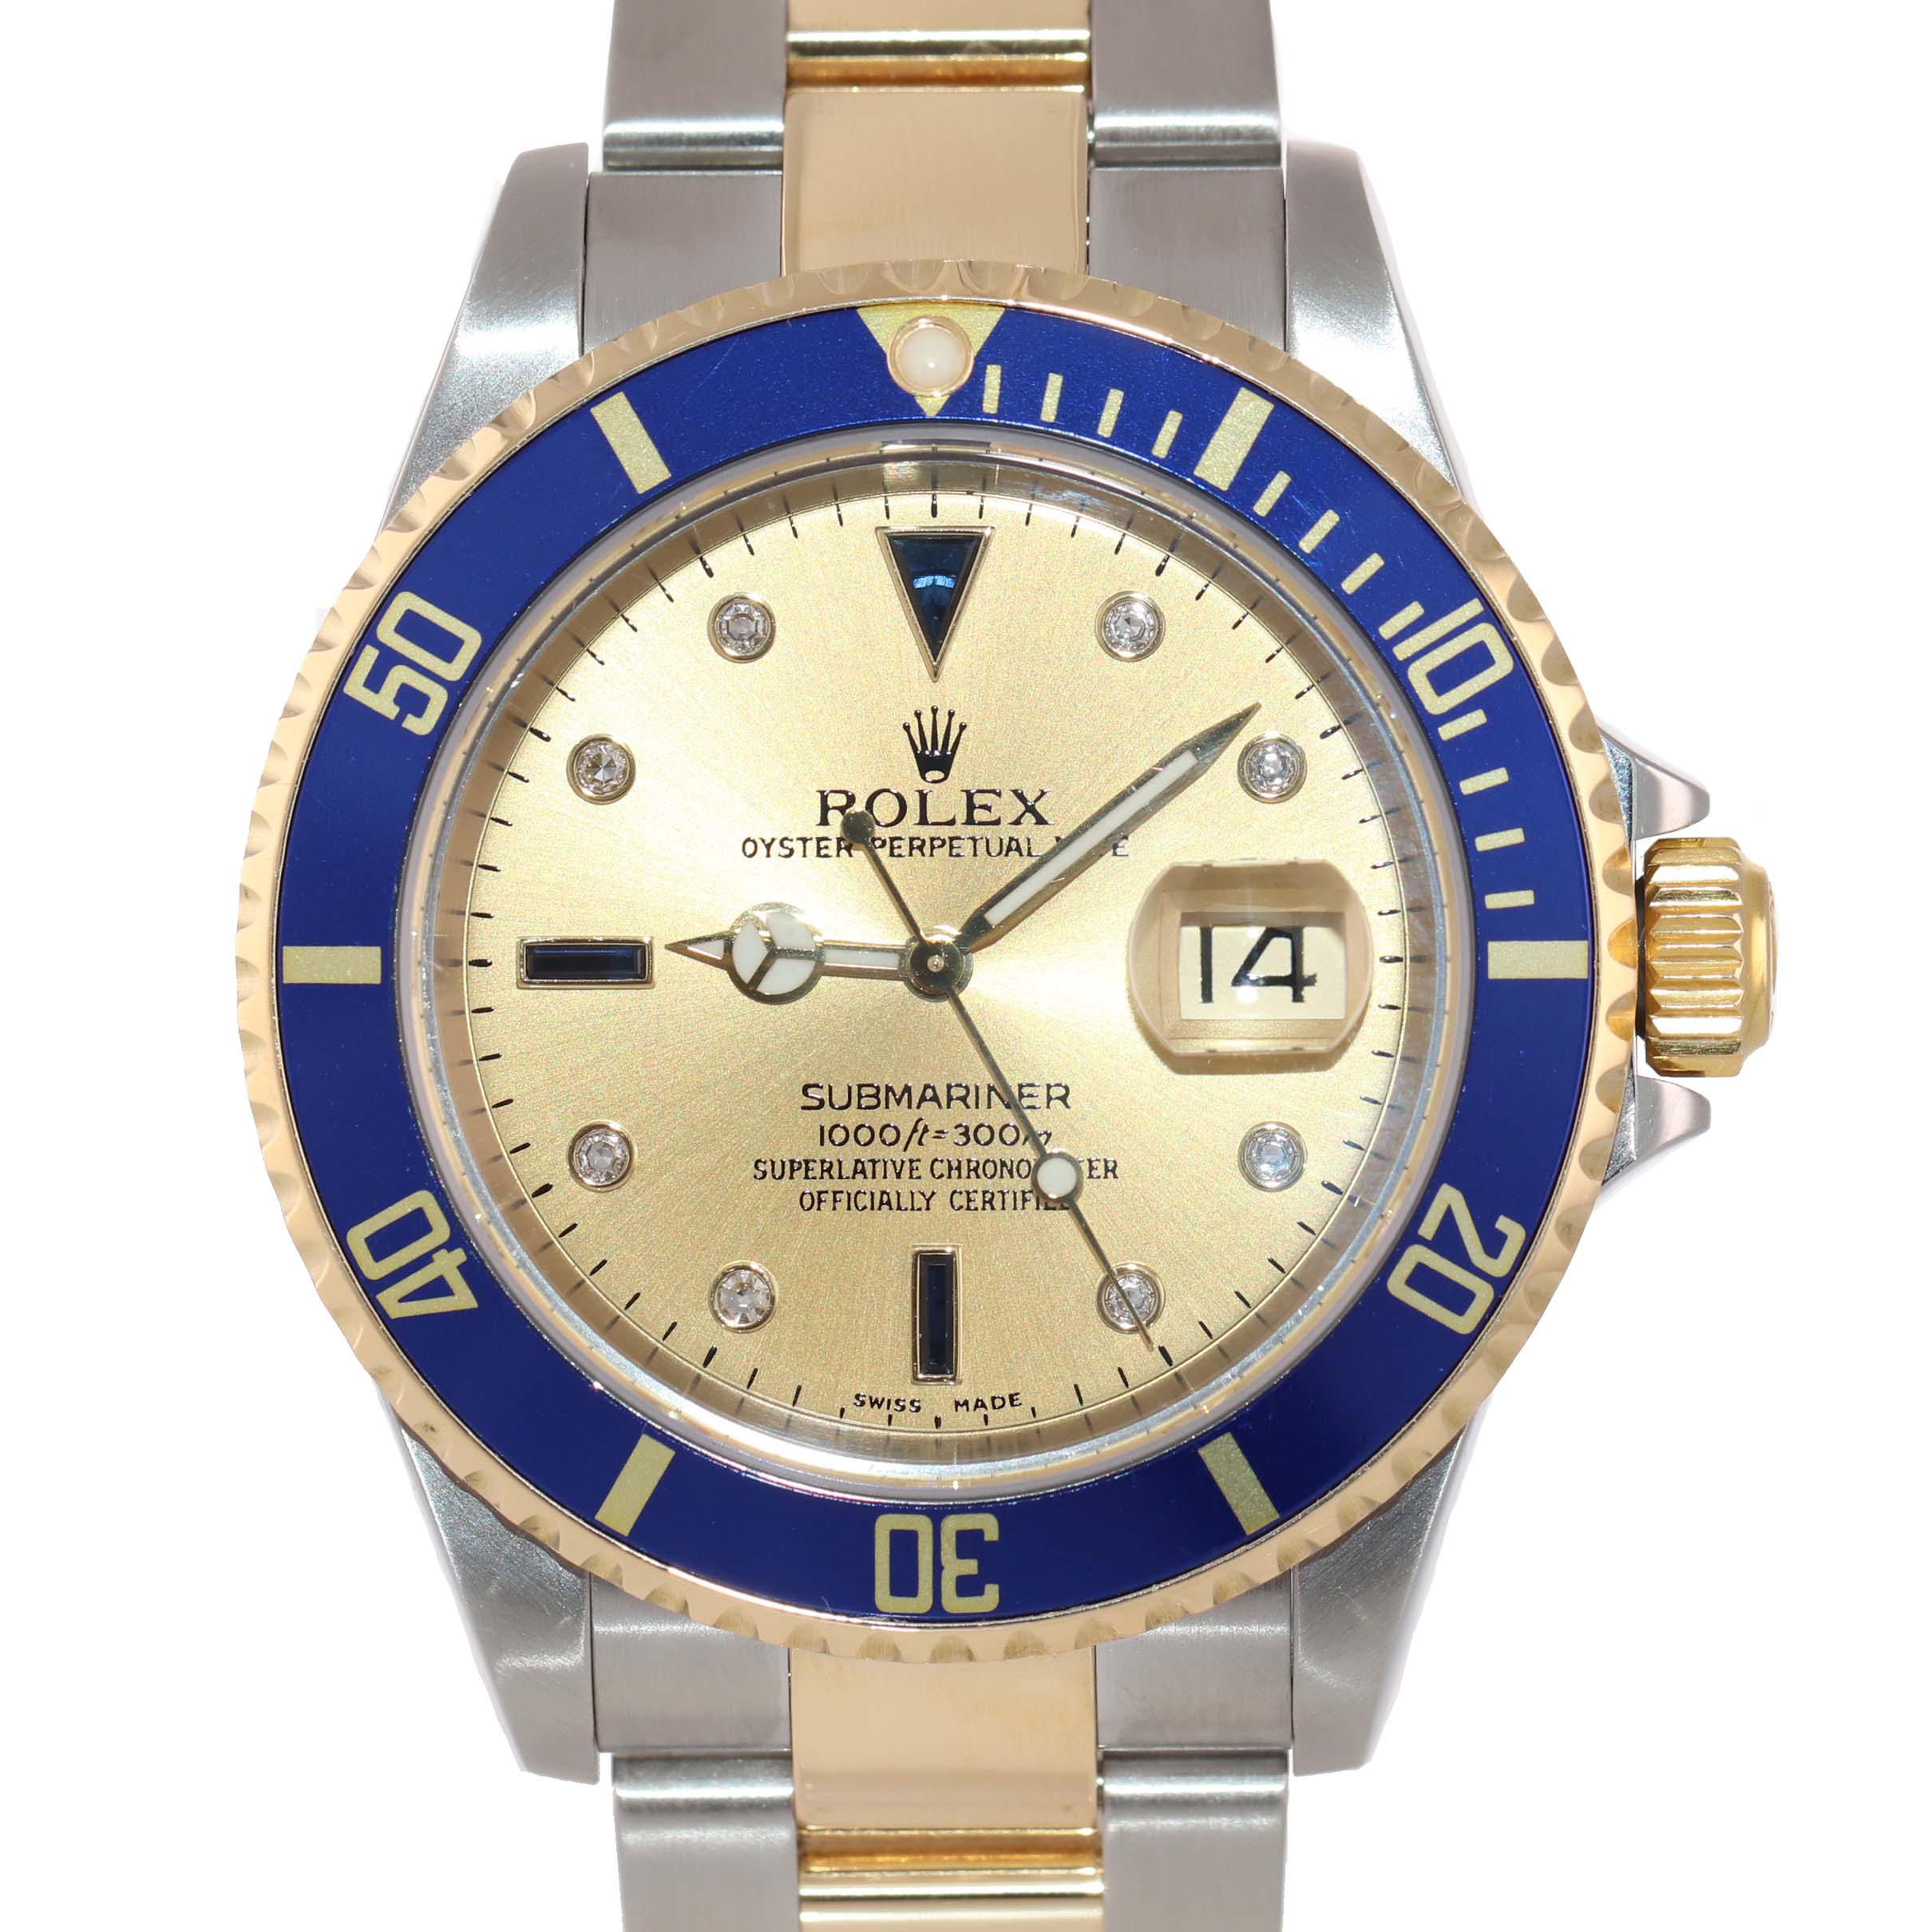 PAPERS 2005 Rolex Submariner 16613 Two Tone Gold Steel Factory Diamond Watch Box